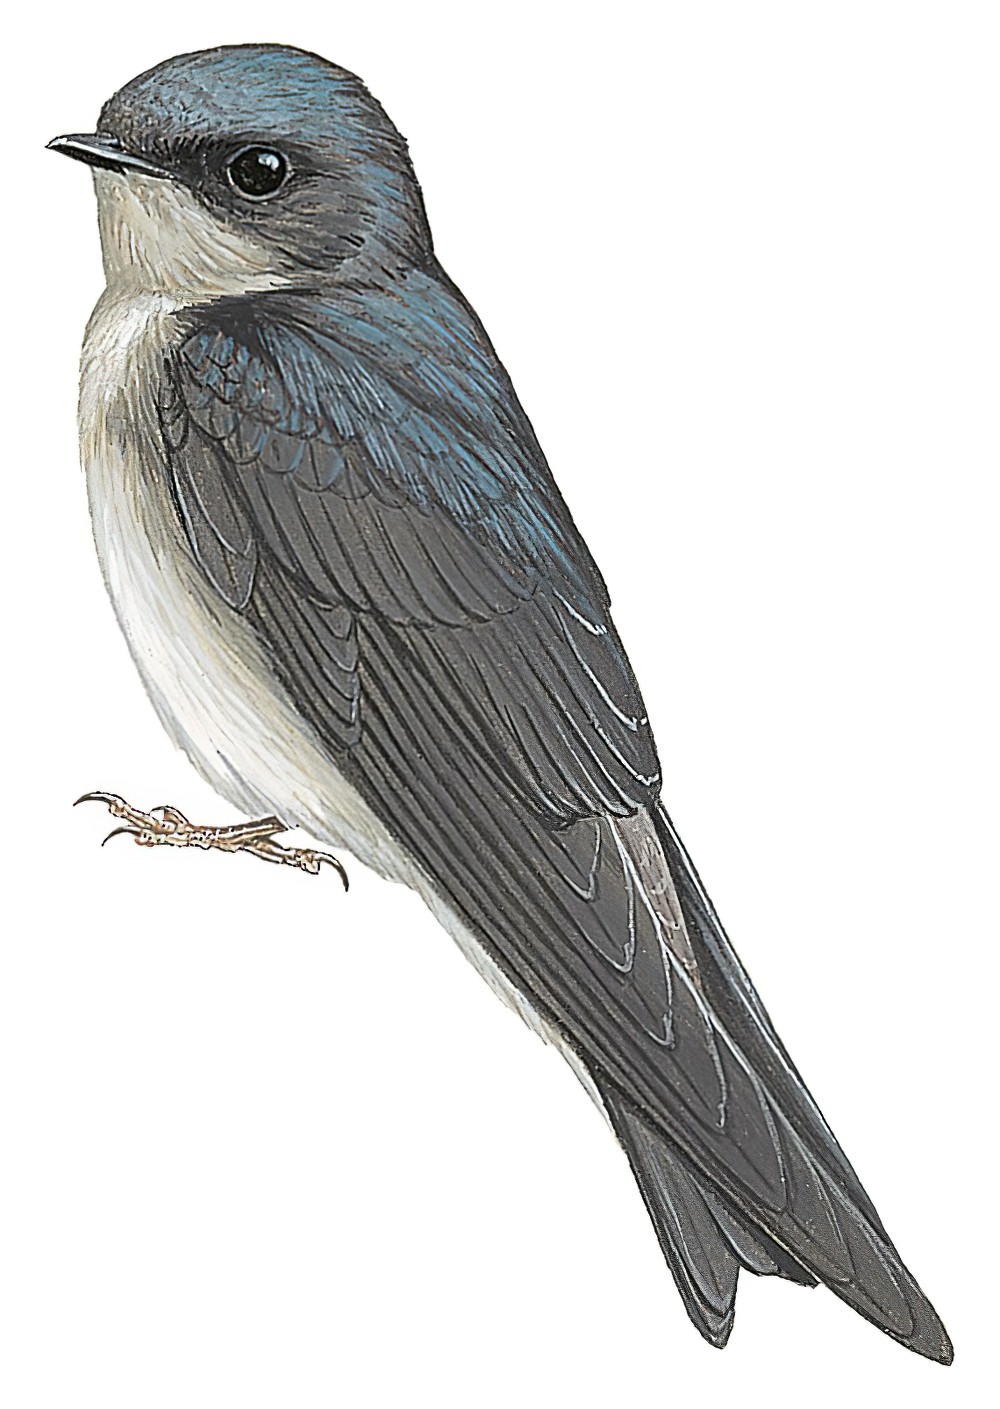 Andean Swallow / Orochelidon andecola